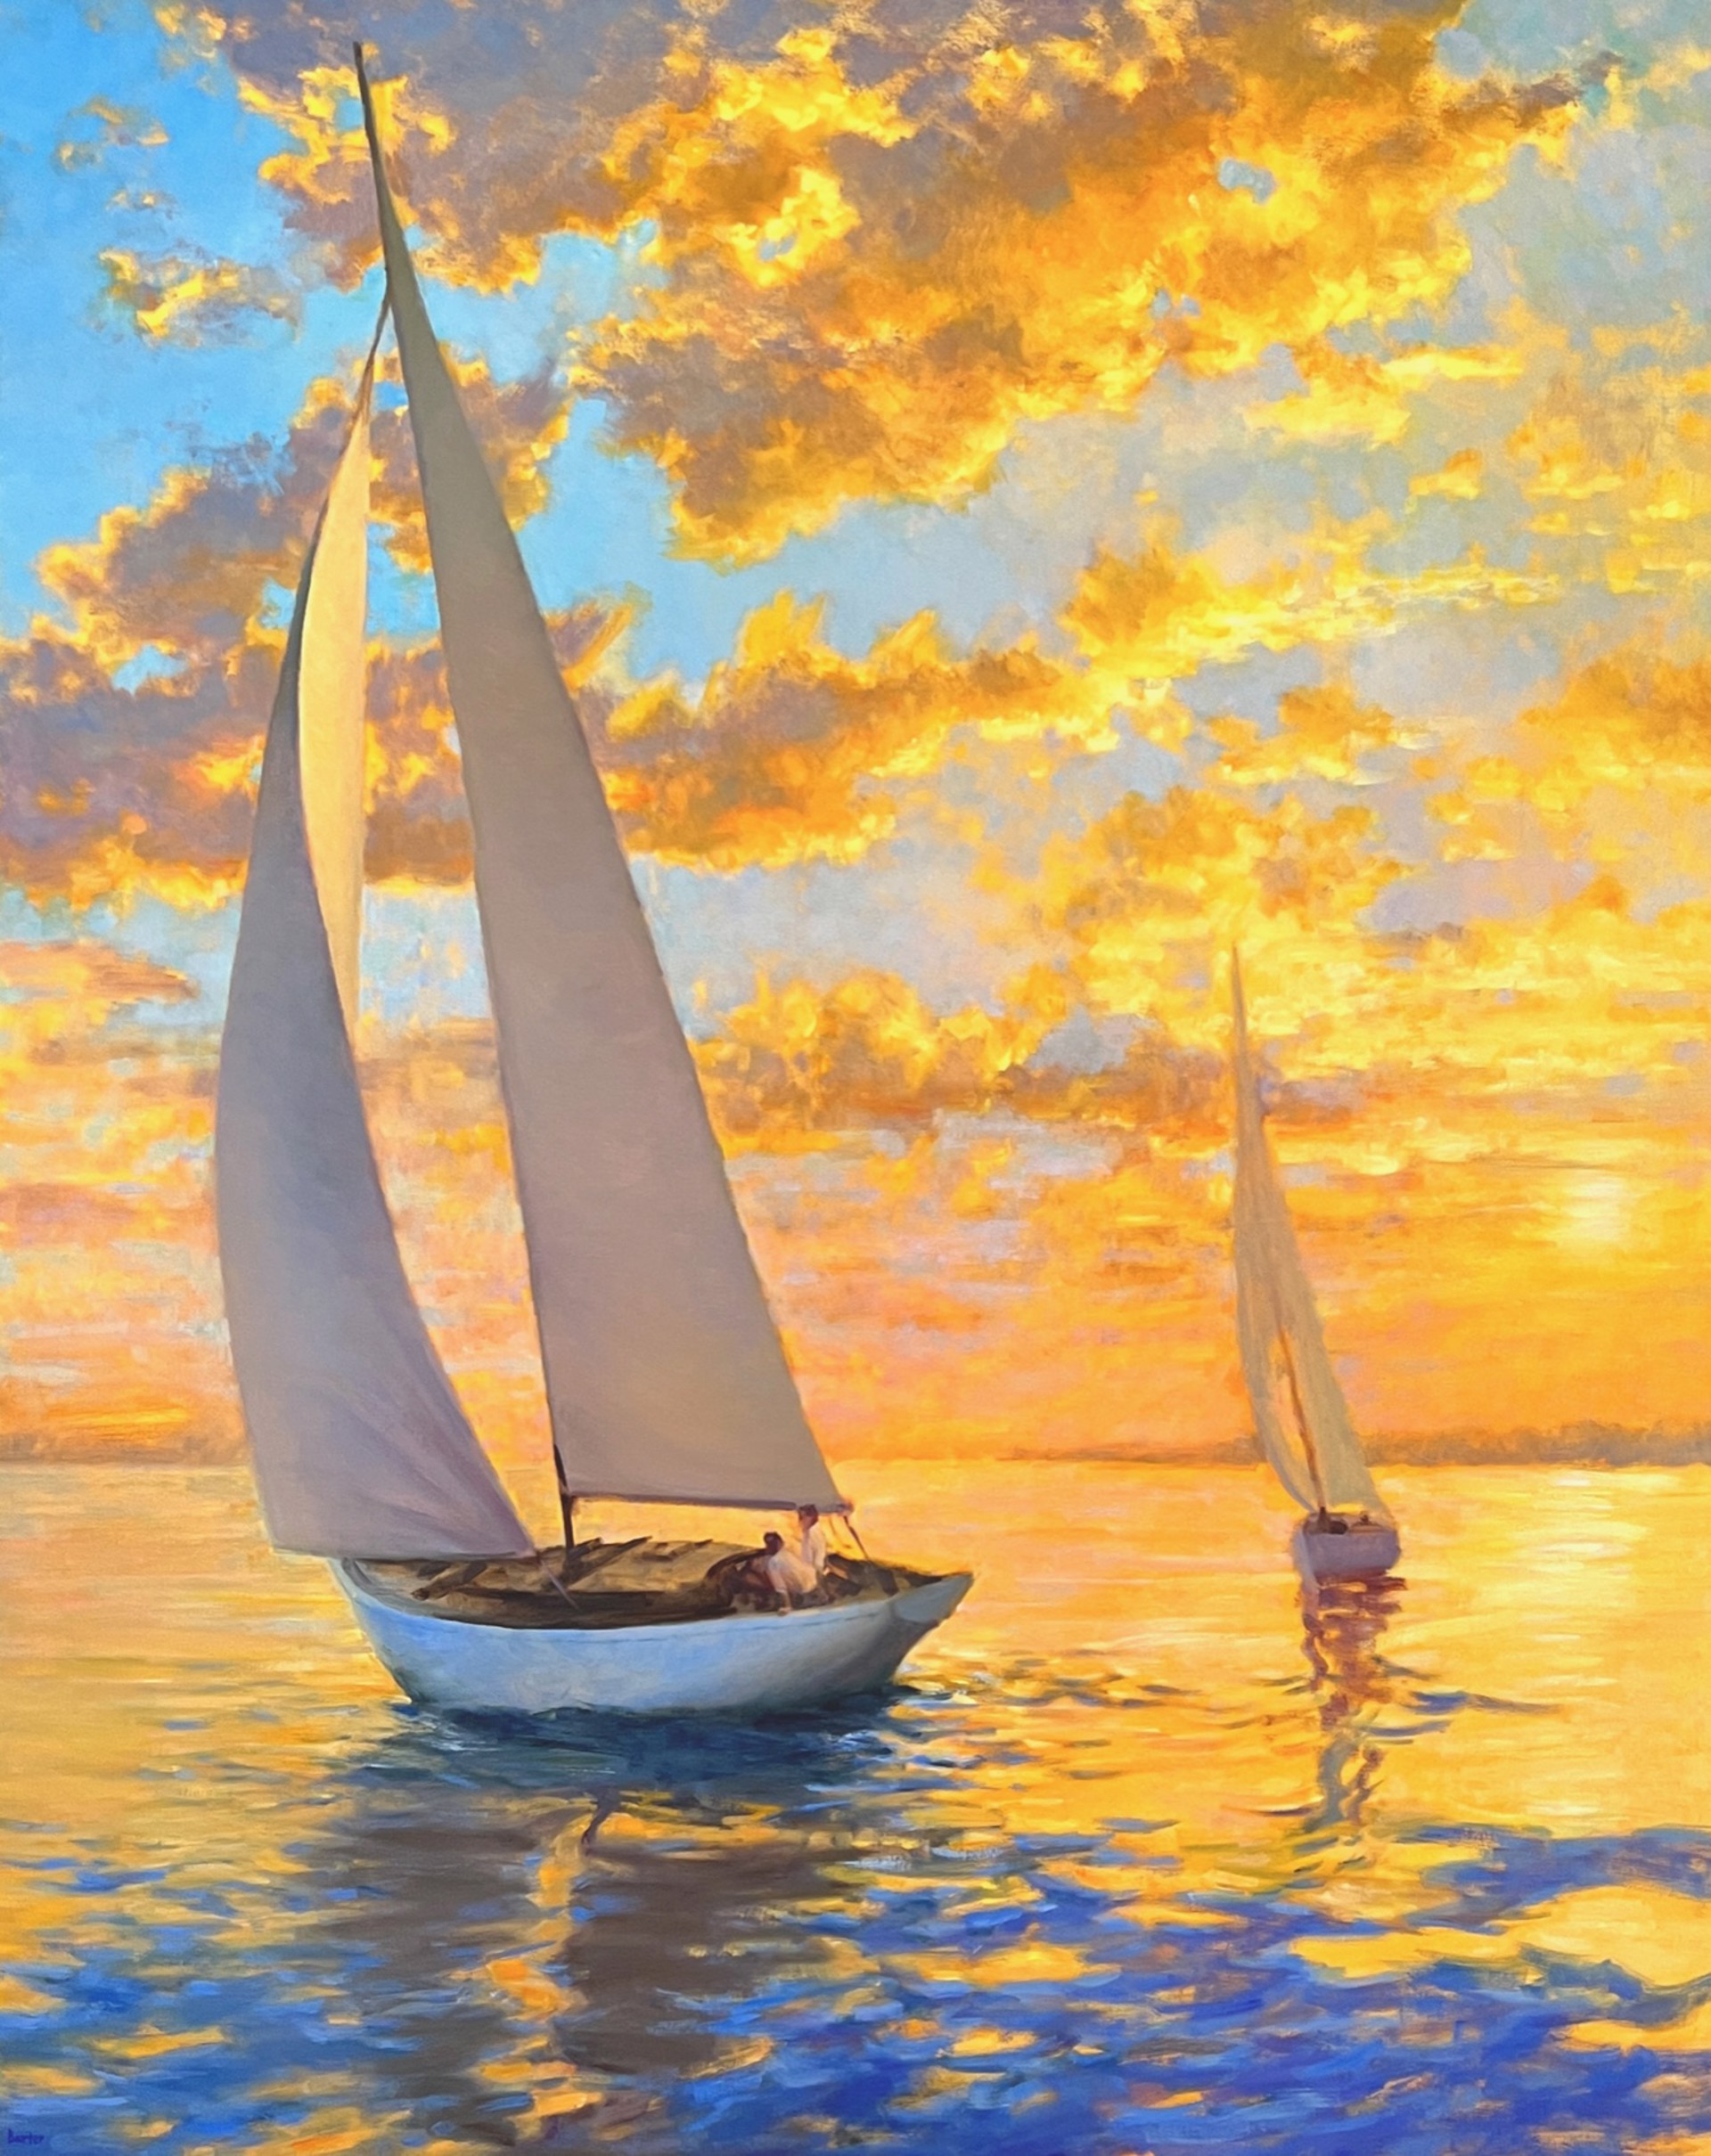 "Sea and Sails" by Stacy Barter